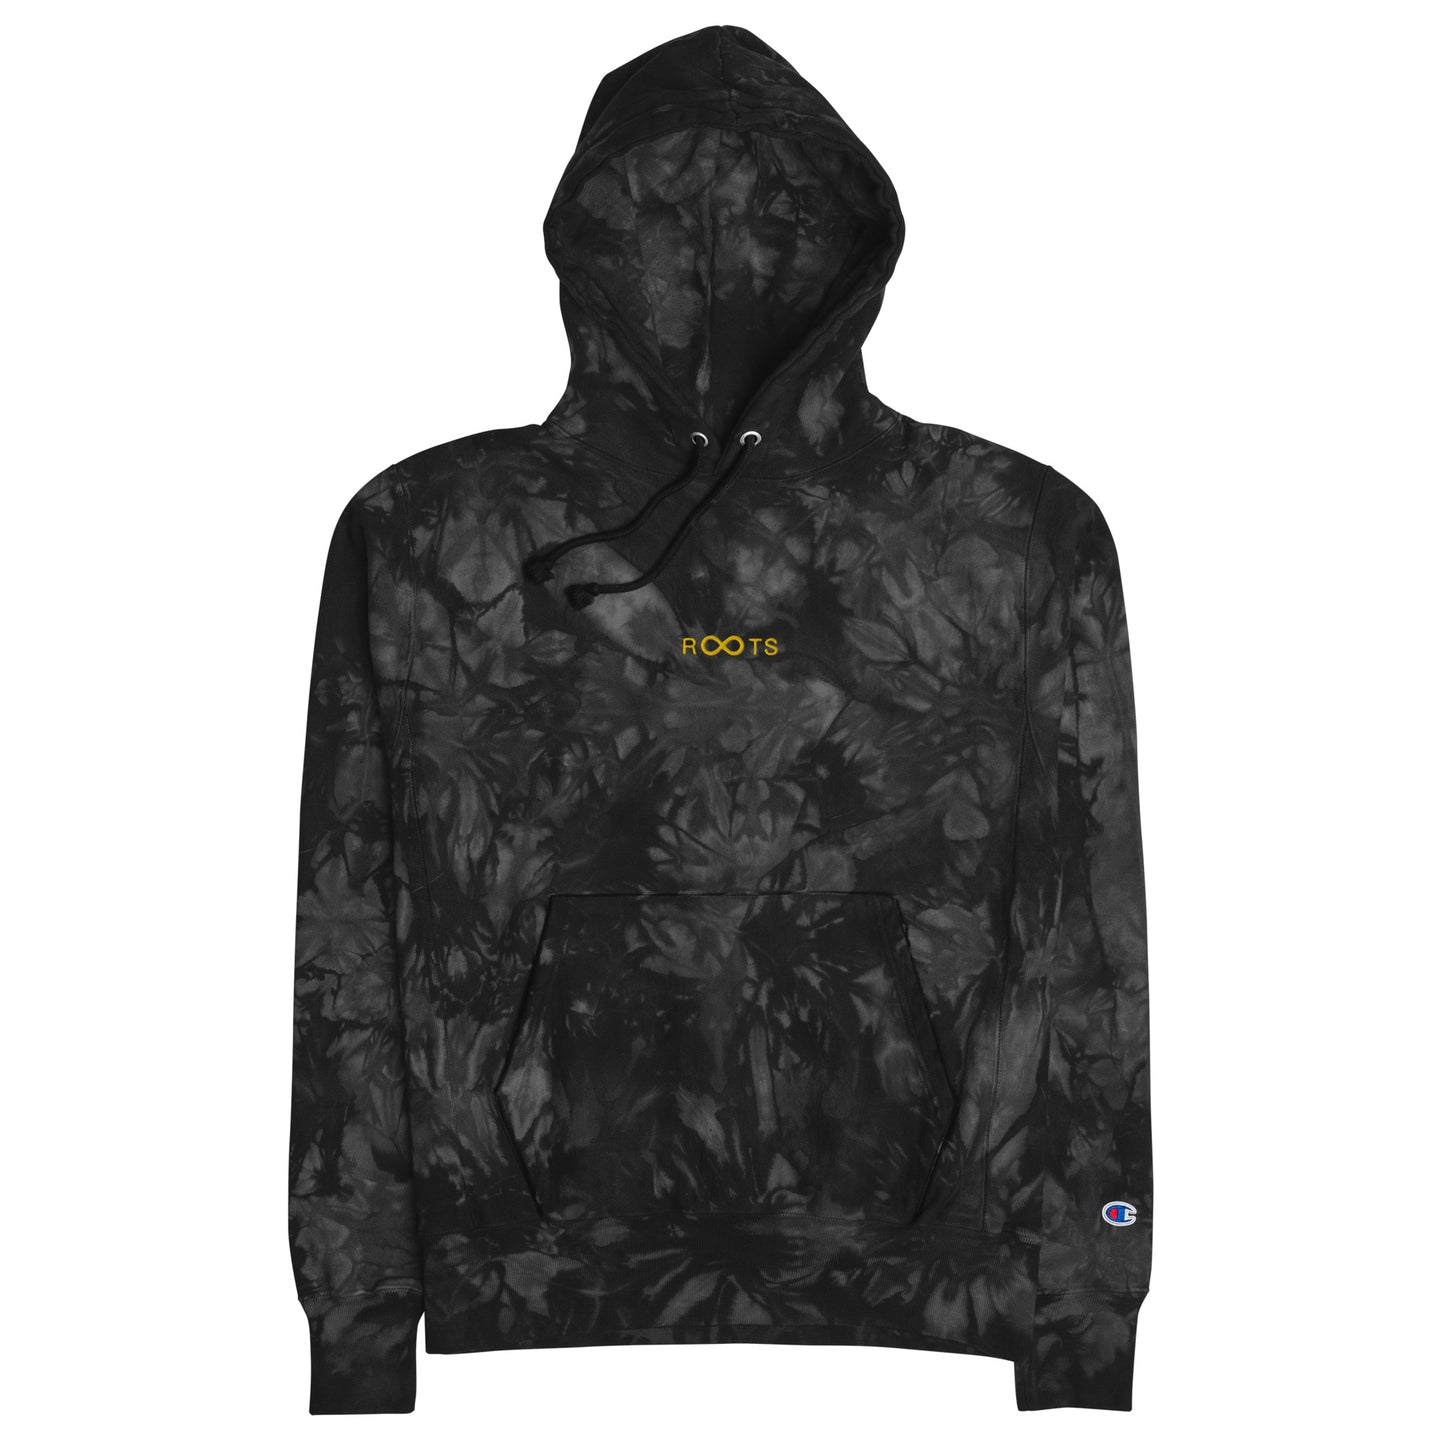 Gold Roots Are Forever Unisex Champion tie-dye hoodie